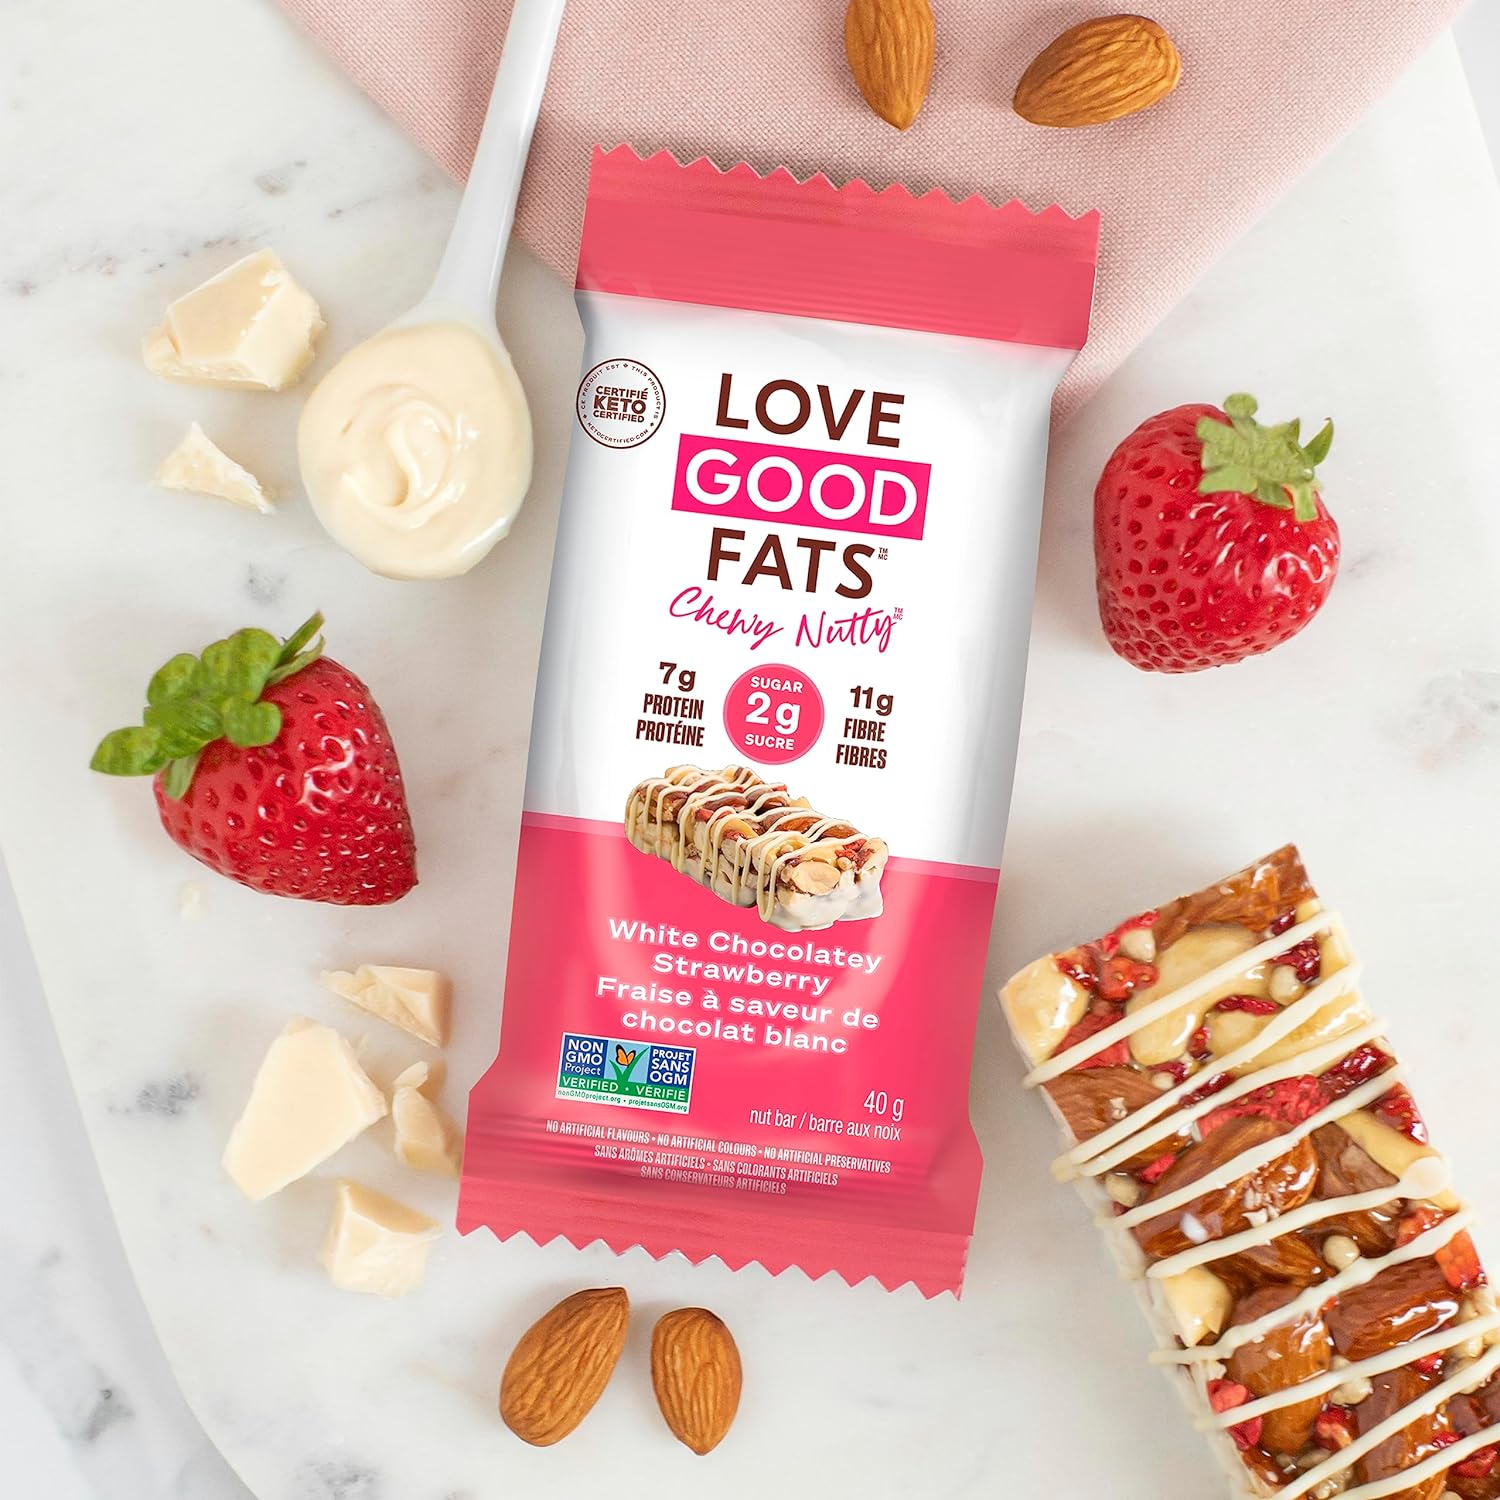 Love Good Fats Chewy Nutty White Chocolatey Strawberry Keto Bars - Low Carb Protein Snacks - 12 pack (1.59oz / 45g each bar) : Health & Household